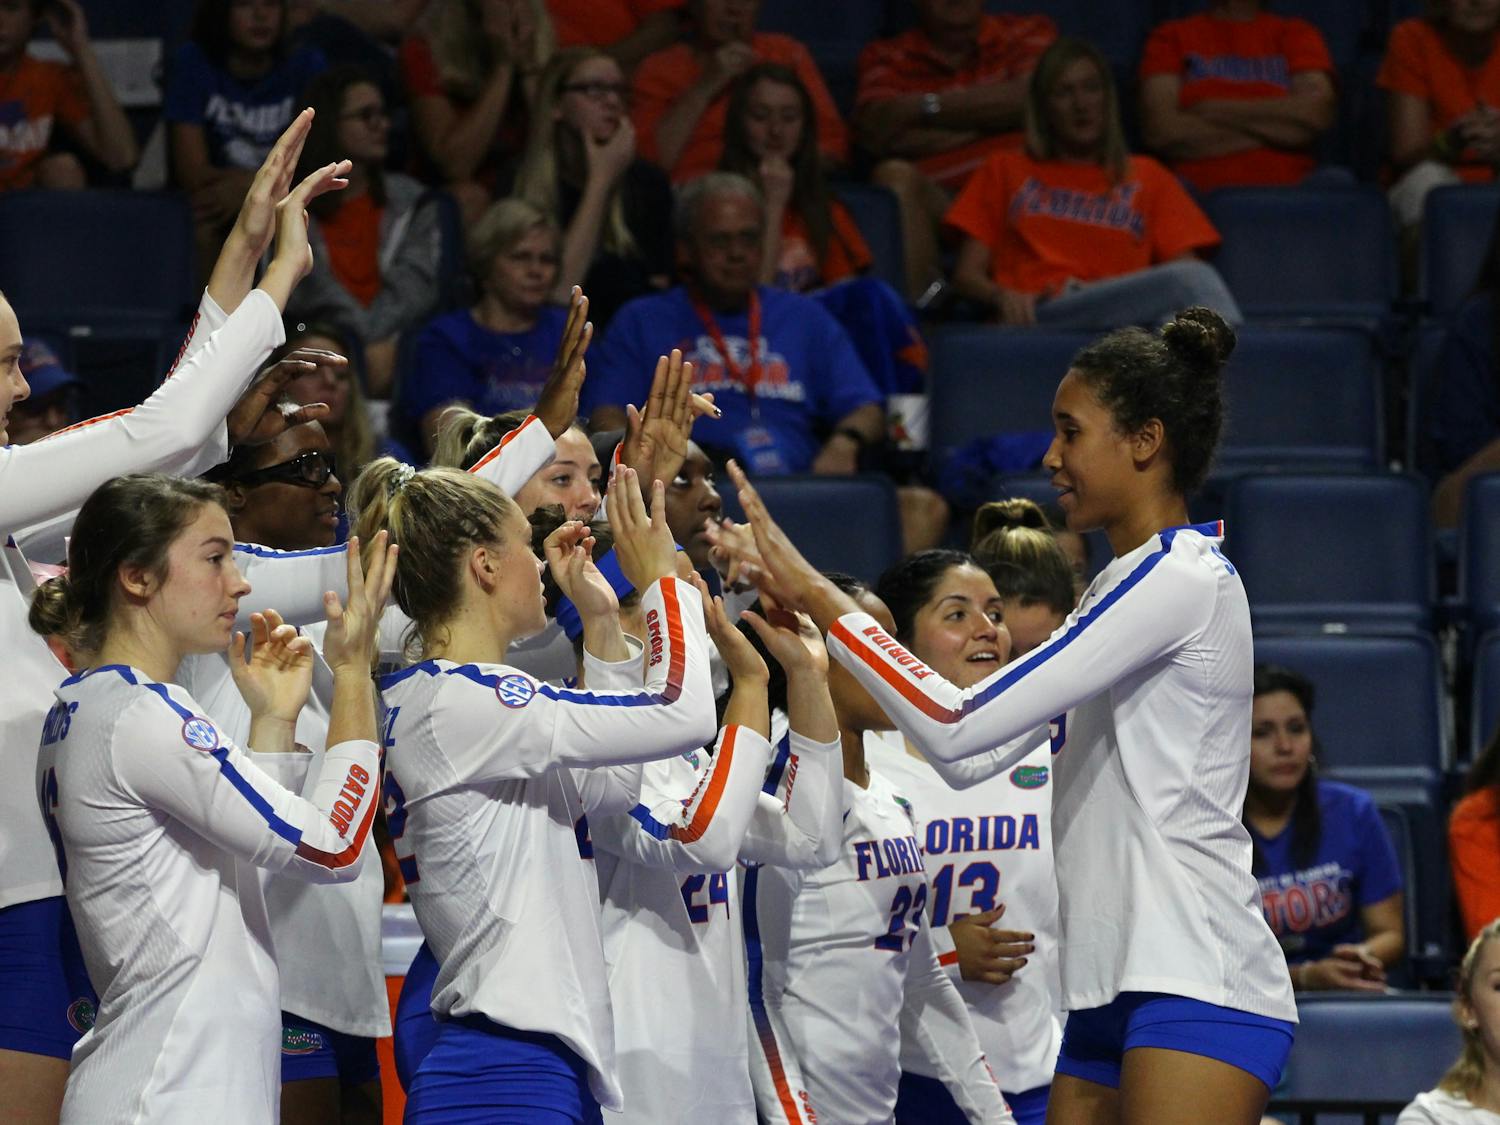 Florida's volleyball team defeated Stanford 3-2 in the Final Four of the NCAA Tournament on Thursday. It will now face Nebraska in the national championship match on Saturday at 9 p.m.